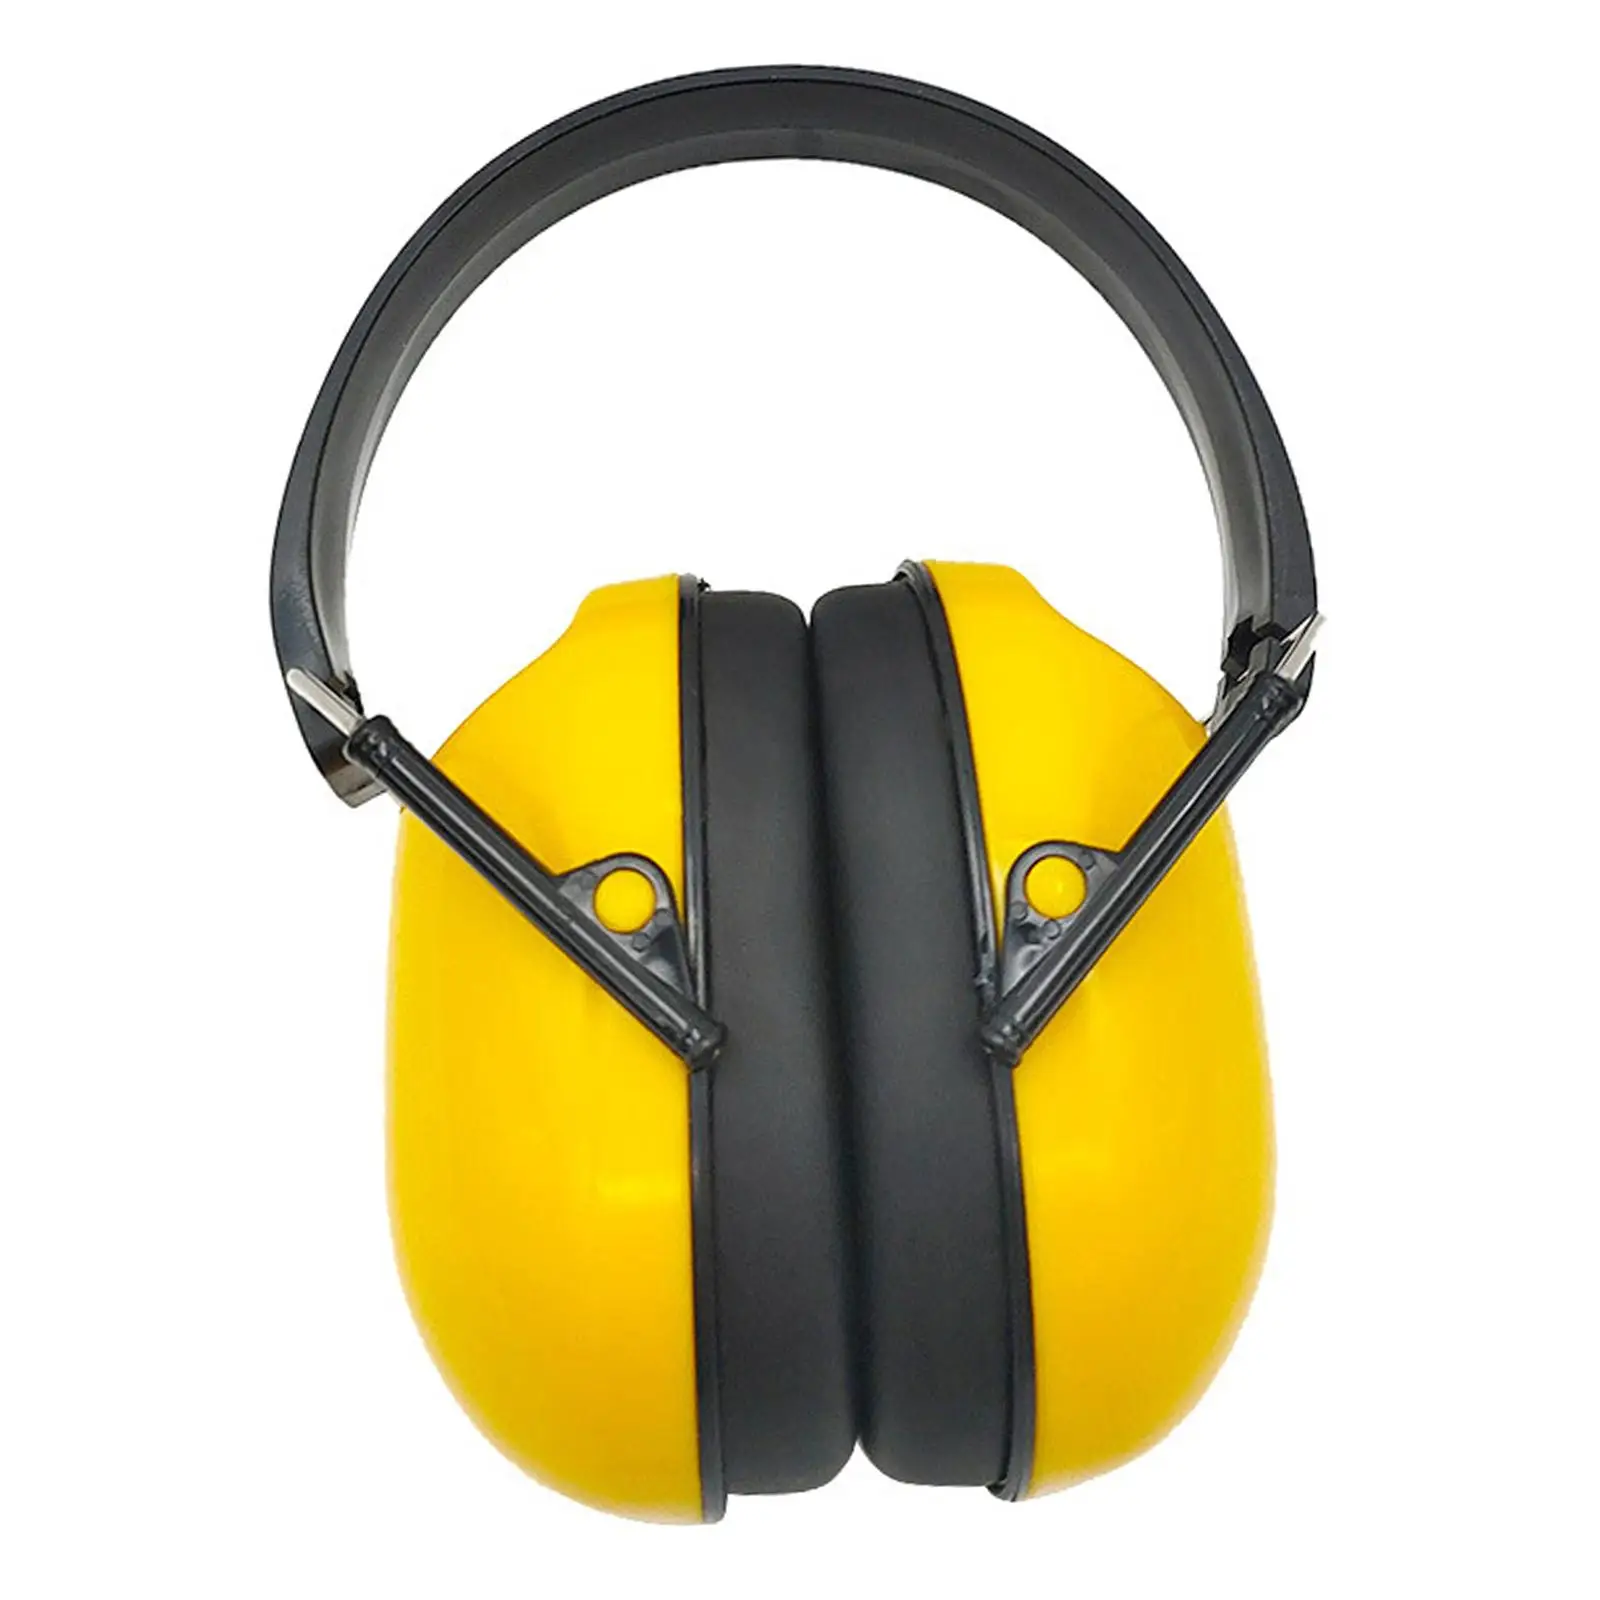 Kids Ear Muffs Hearing Protection Foldable Earplugs Headband Ear Defenders Ear Protection for Fireworks Airports Sports Events